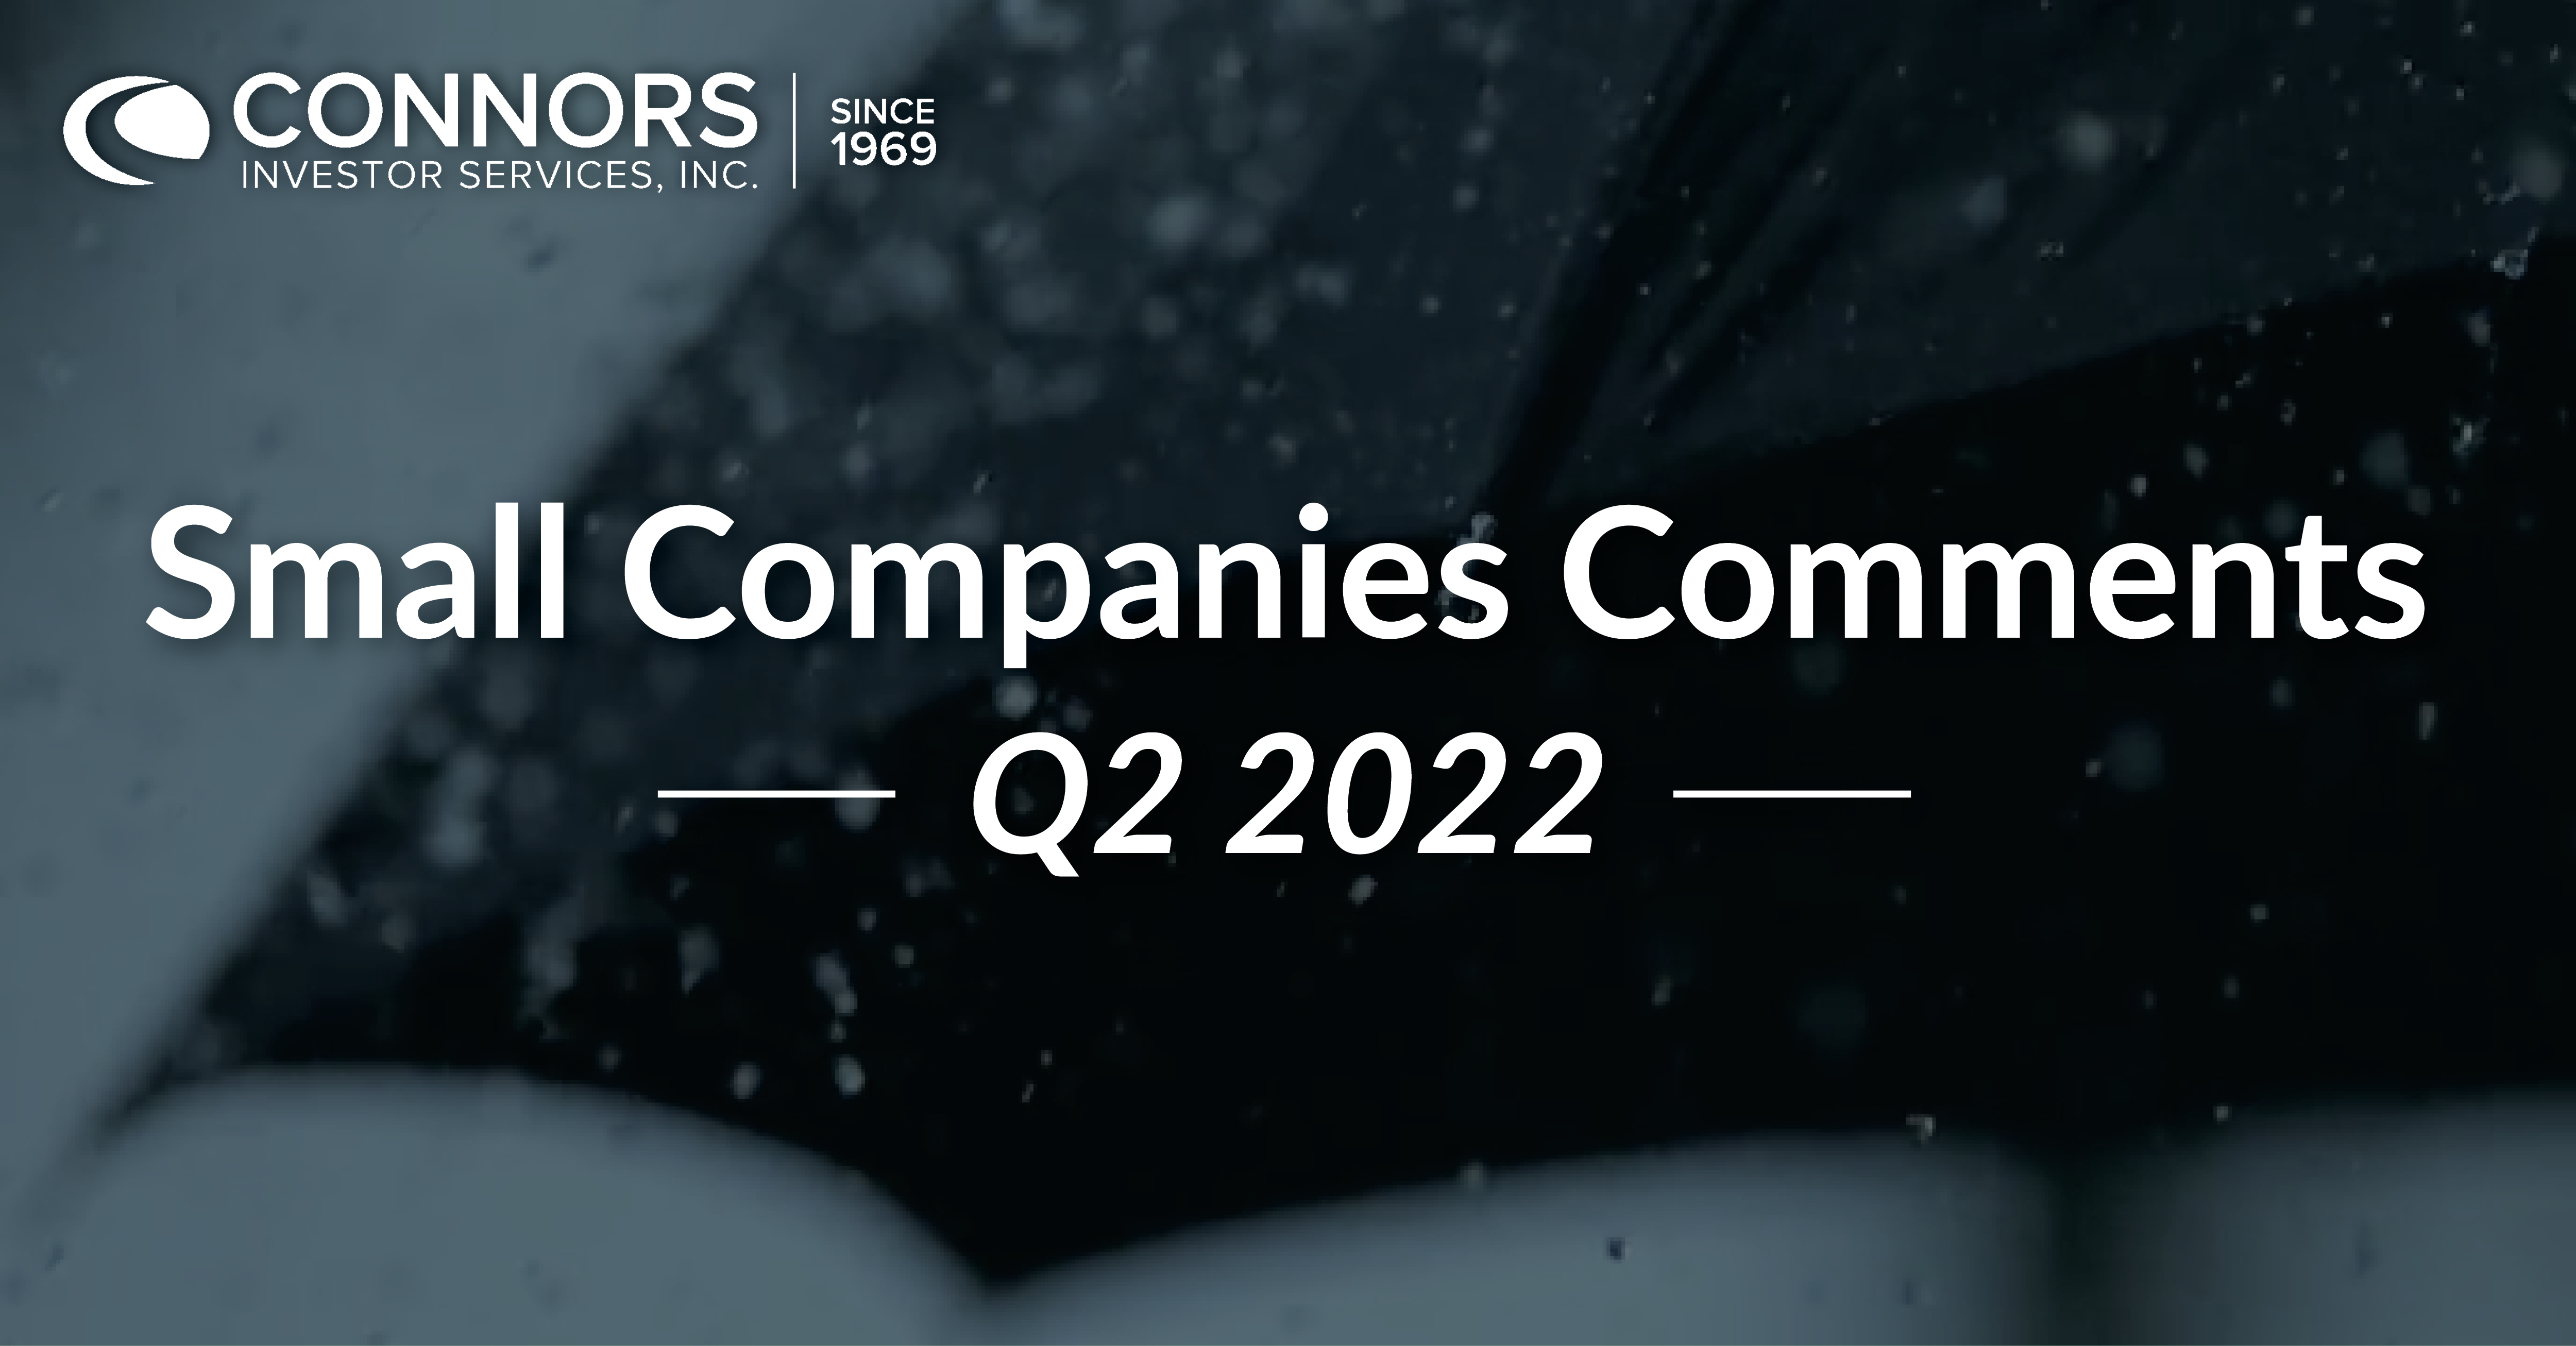 Q2 2022 Small Companies Comments